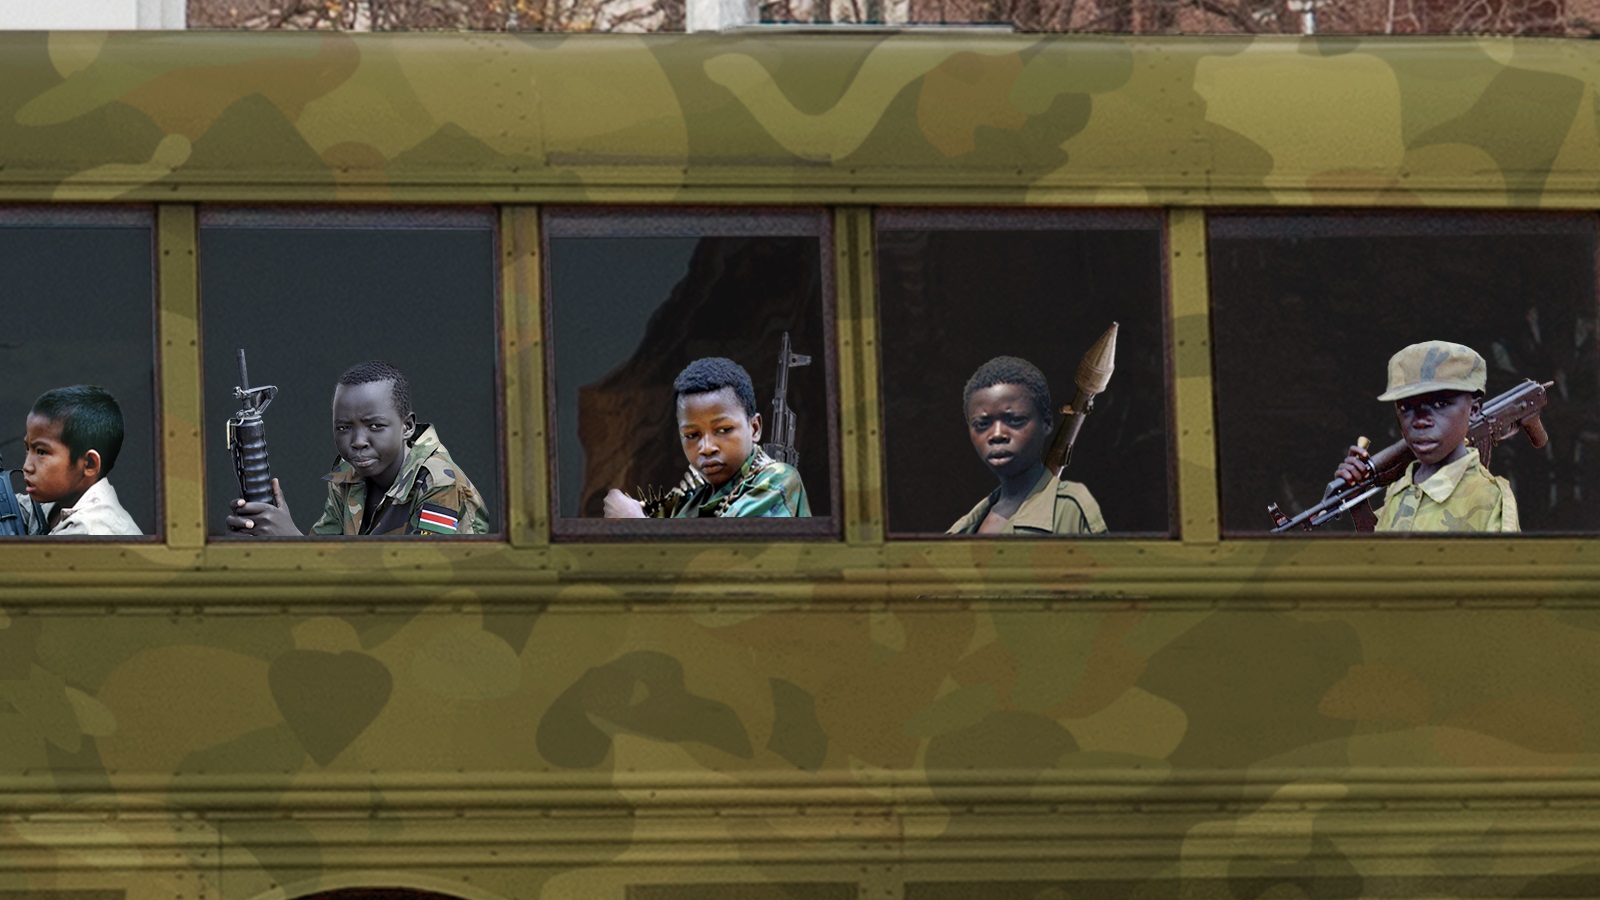 Revamped School Bus Raises Awareness About Child Soldiers